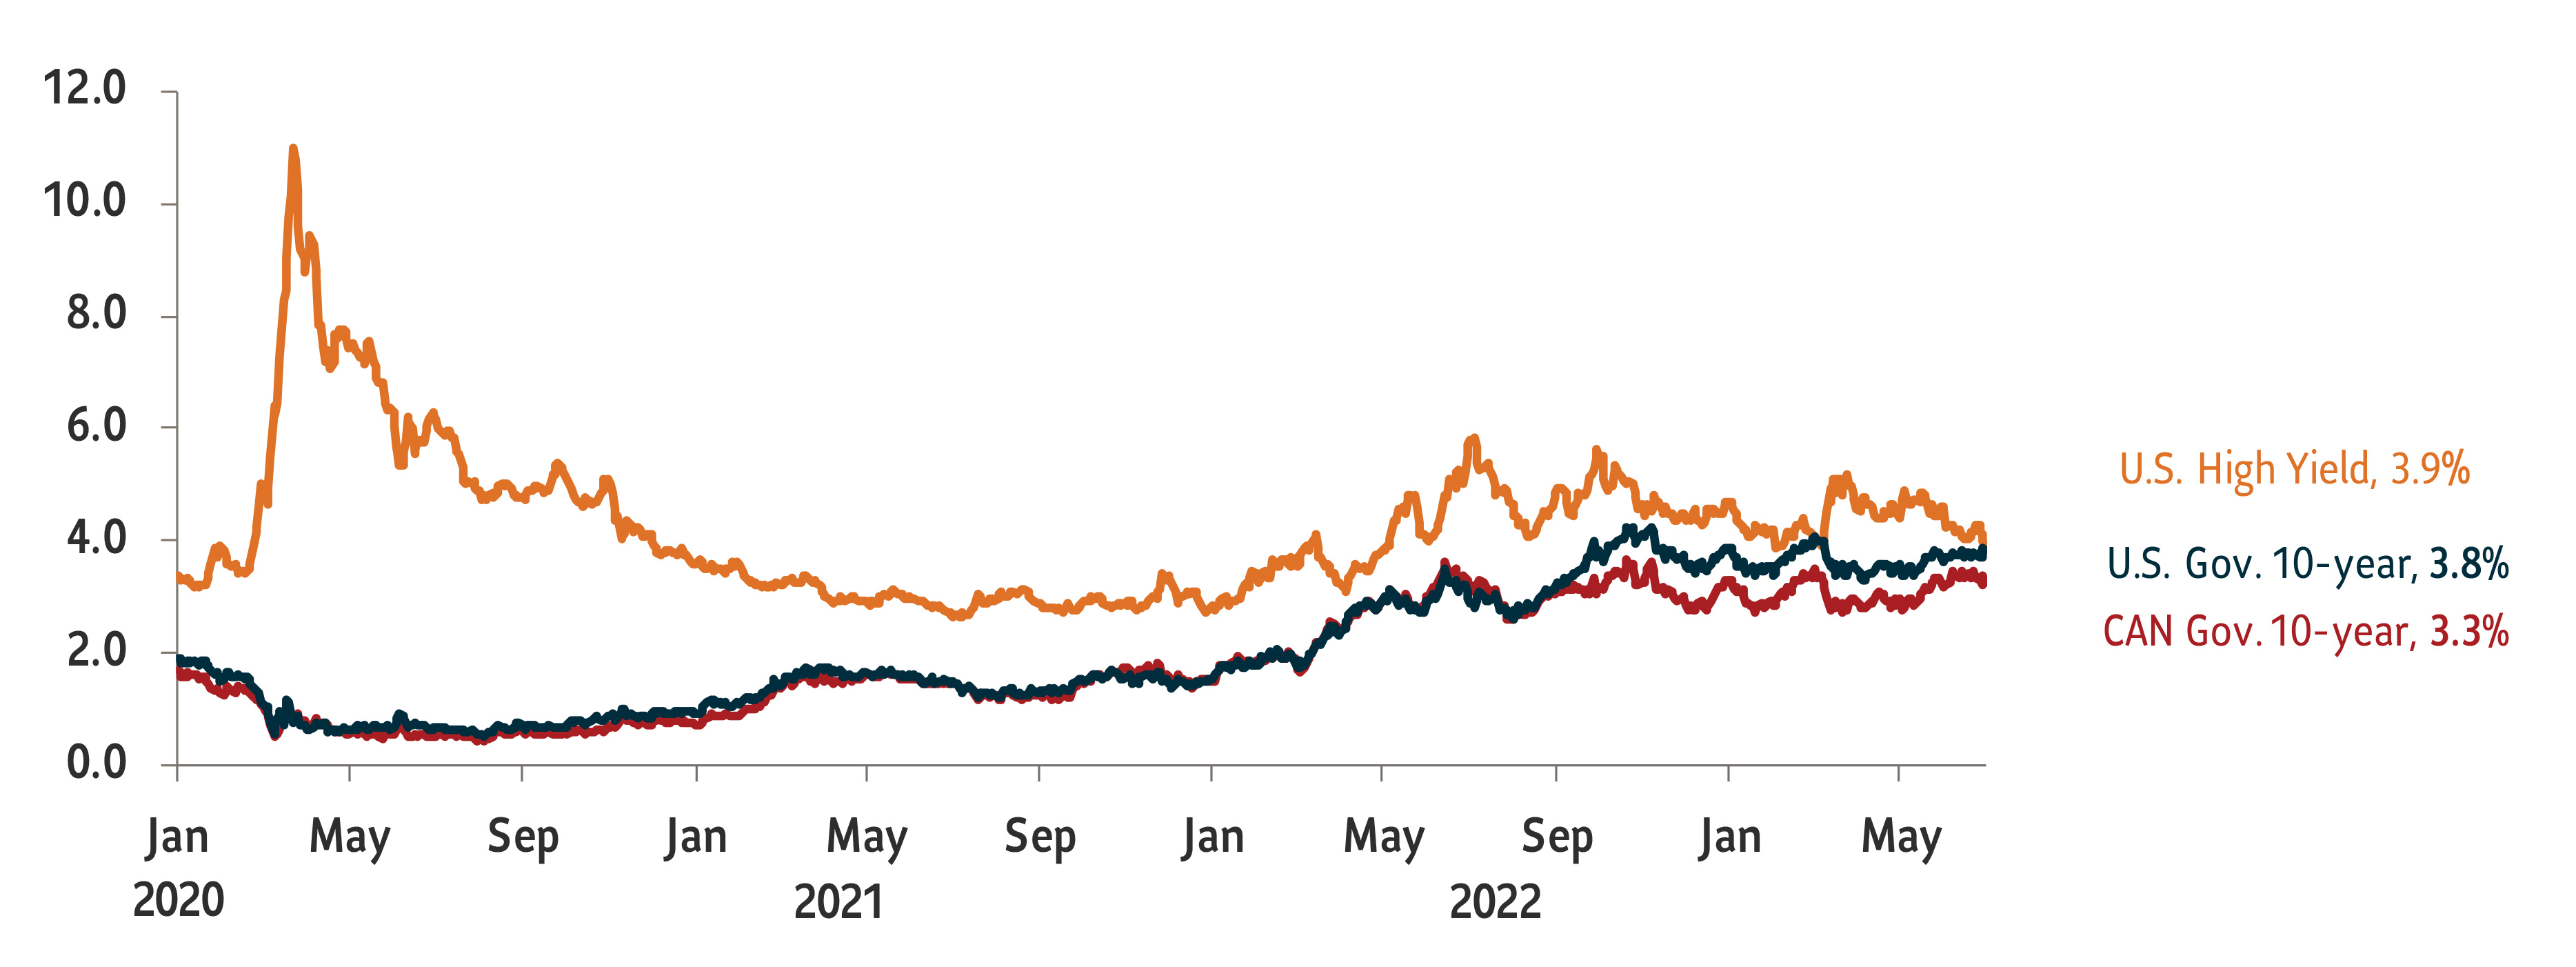 The graph shows the yields for major fixed income instruments for the period between January 1, 2020 and ending on June 30, 2023. As of June 30, 2023, the U.S. High Yield bonds yield stood at 3.9%, U.S. 10-Year government bond yields was 3.8% and the Canadian 10-year government bond was 3.3%.